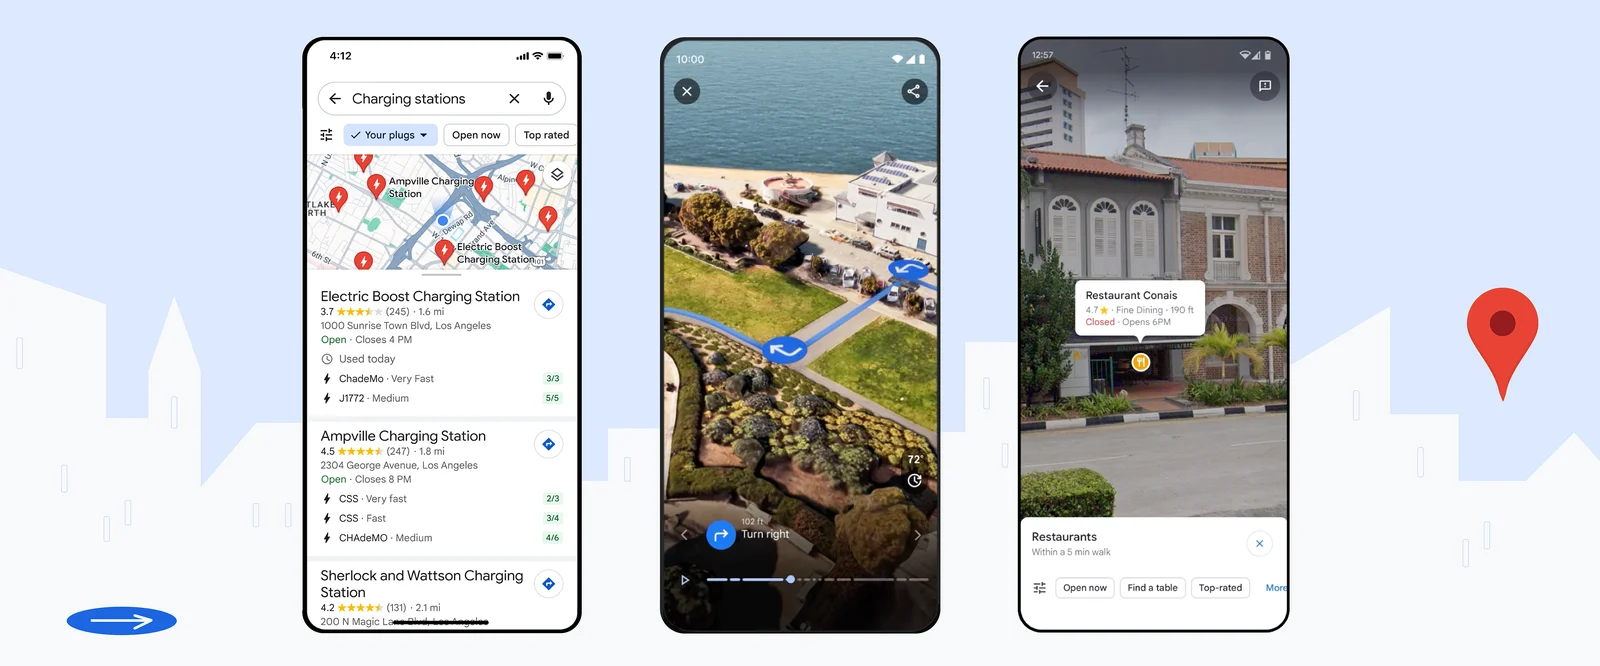 An image shows new Google Maps features. From left to right, they show detailed information about EV chargers in Maps search results, turn-by-turn directions for a cycling route along the water in San Francis